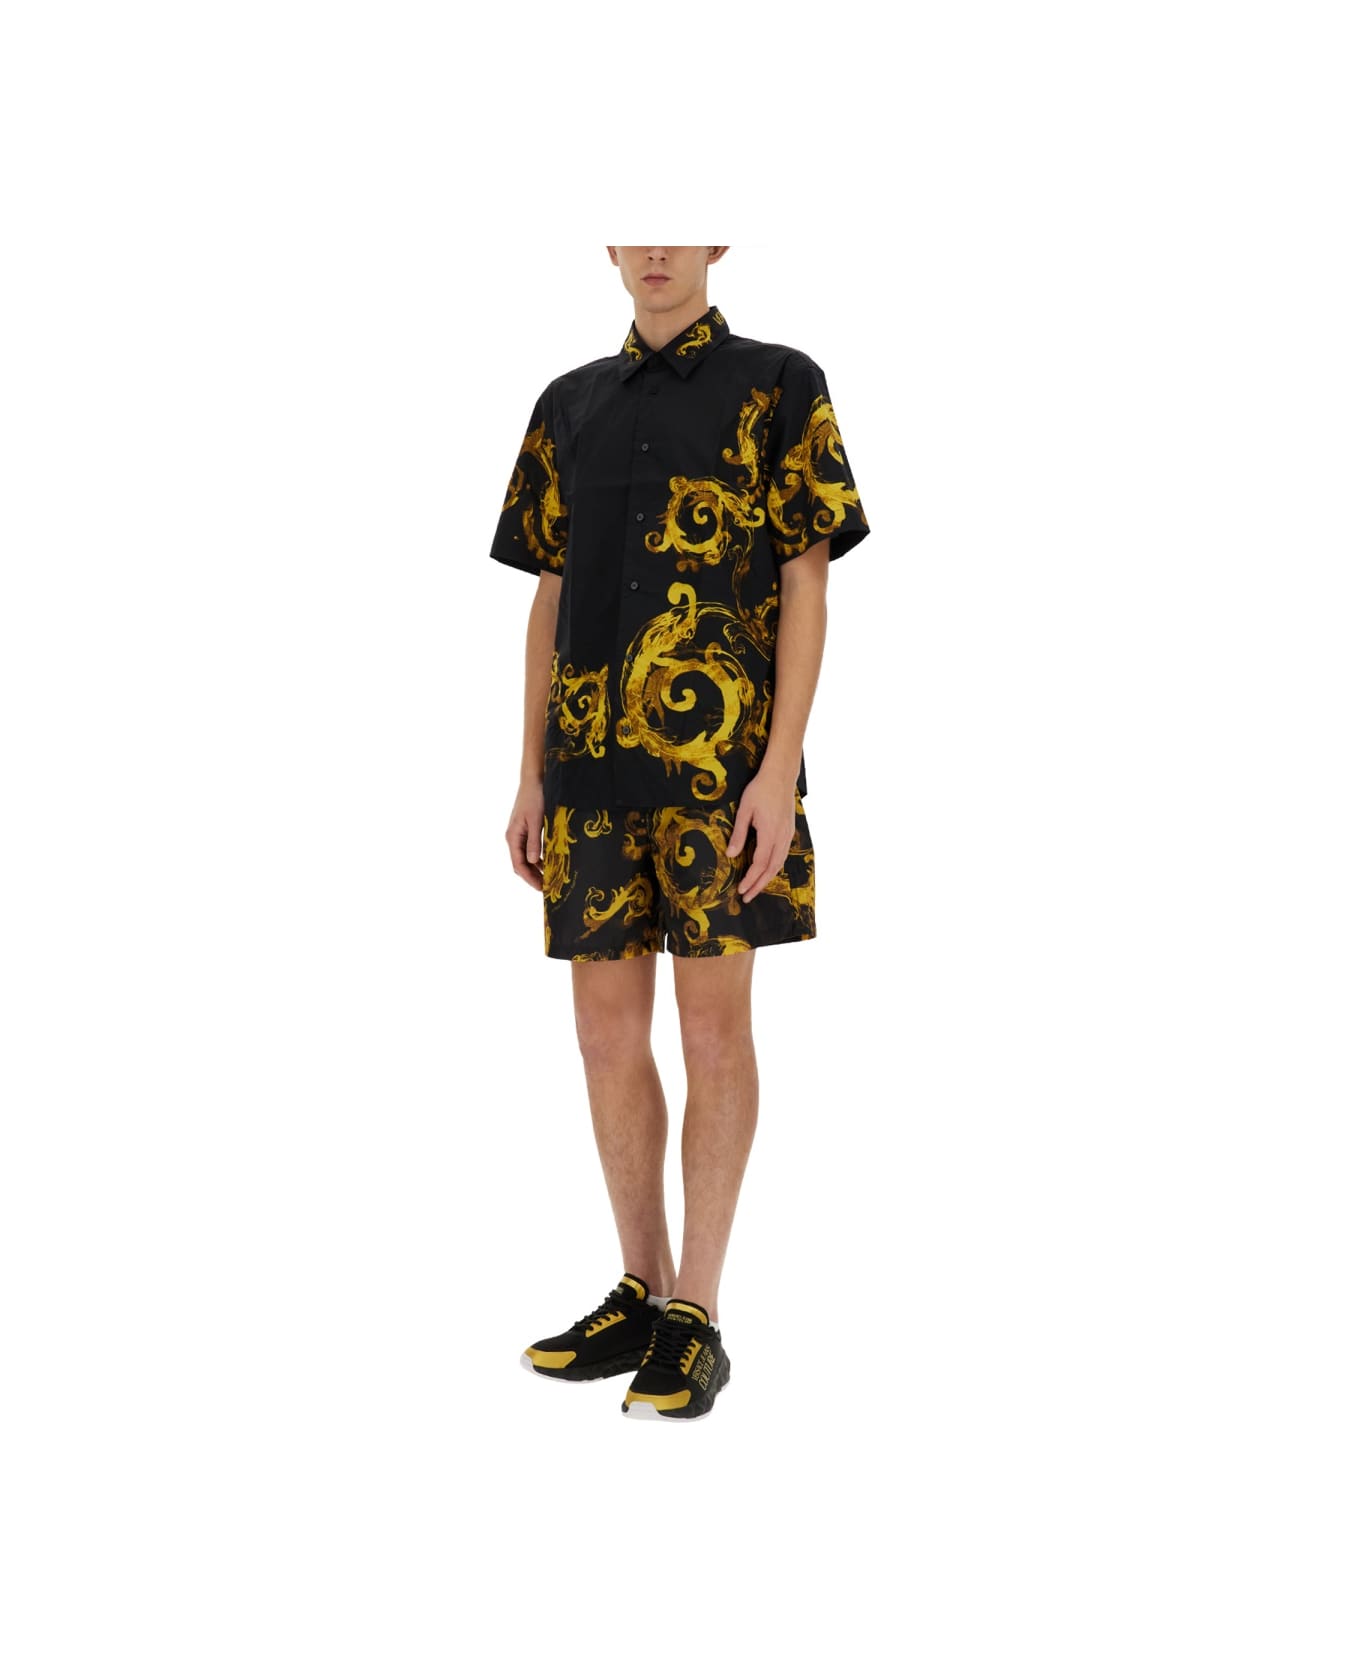 Versace Jeans Couture Baroque Print Shirt - NERO シャツ